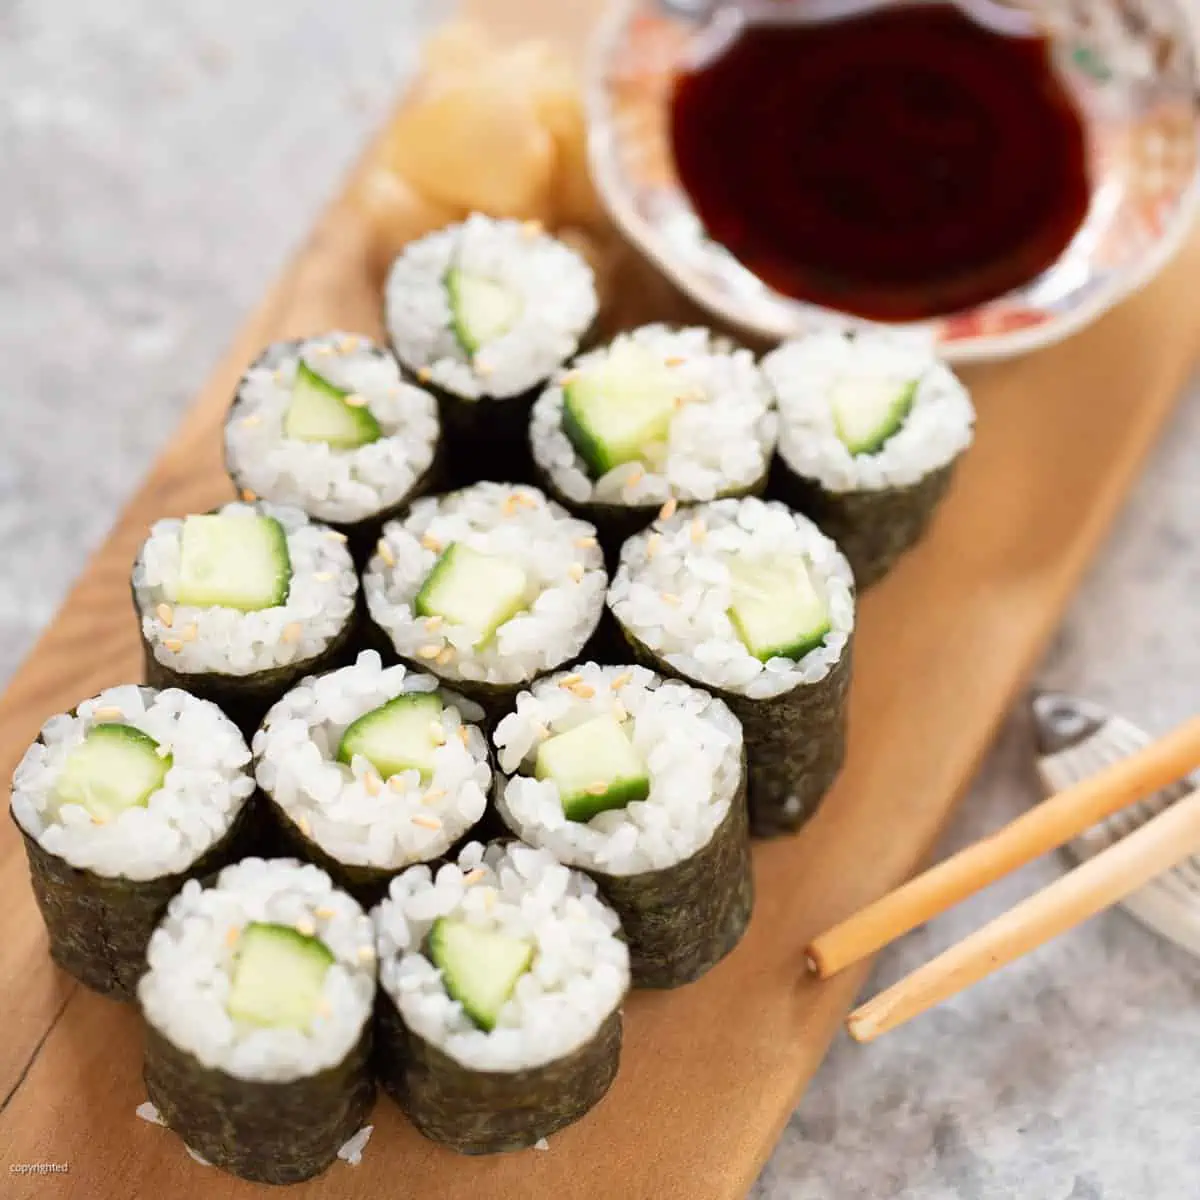 kappa maki cucumber rolls are served on a wooden plate with a small bowl of soy sauce